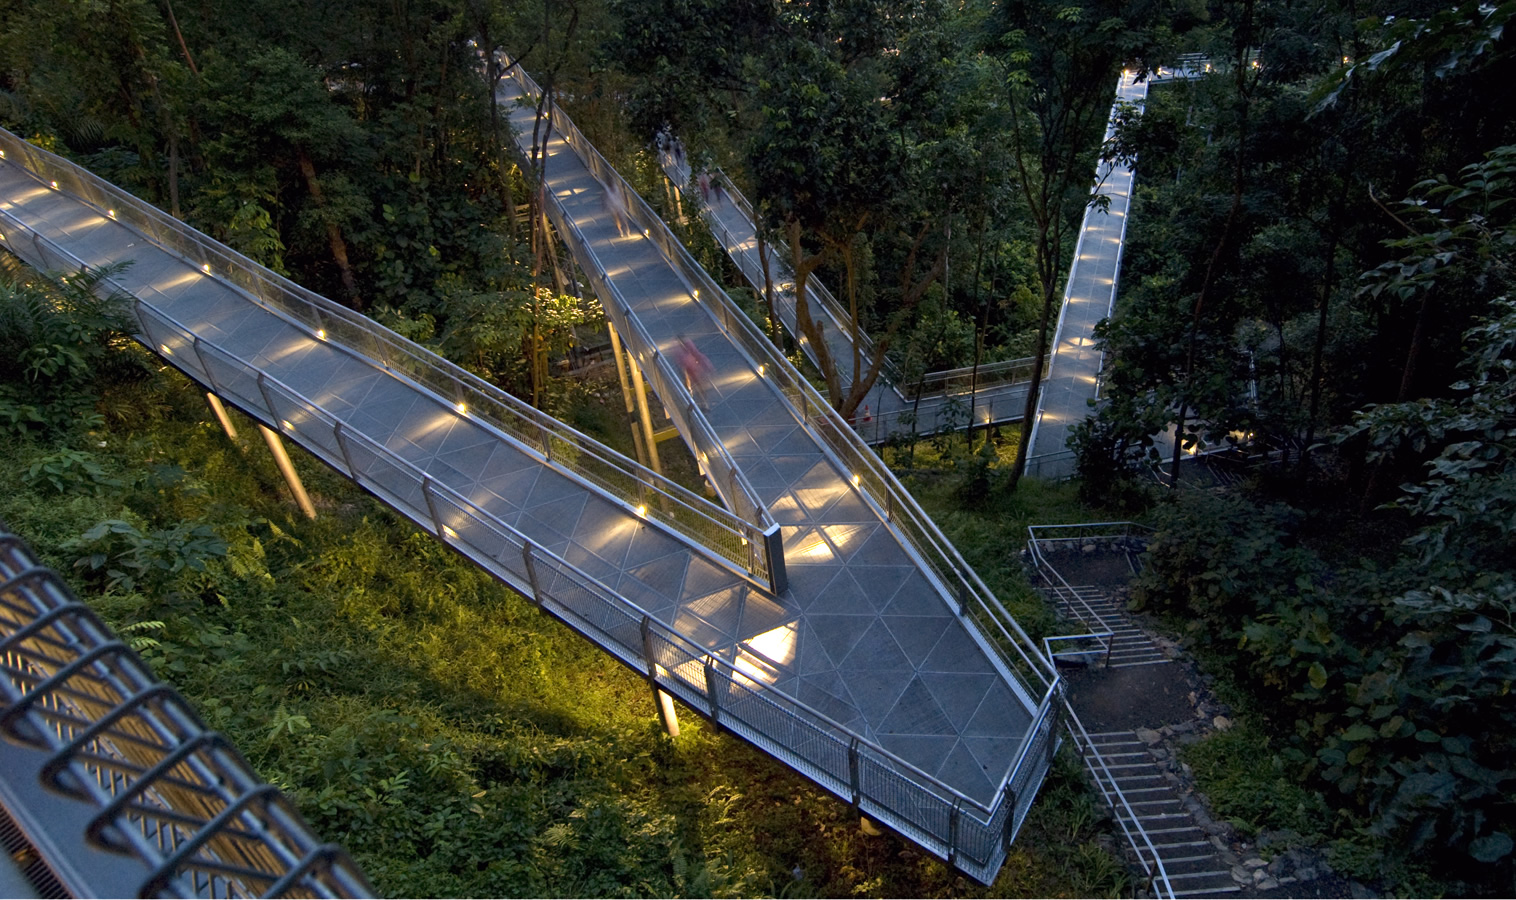 Elevated forest walkway in Telok Blangah Hill Park at night